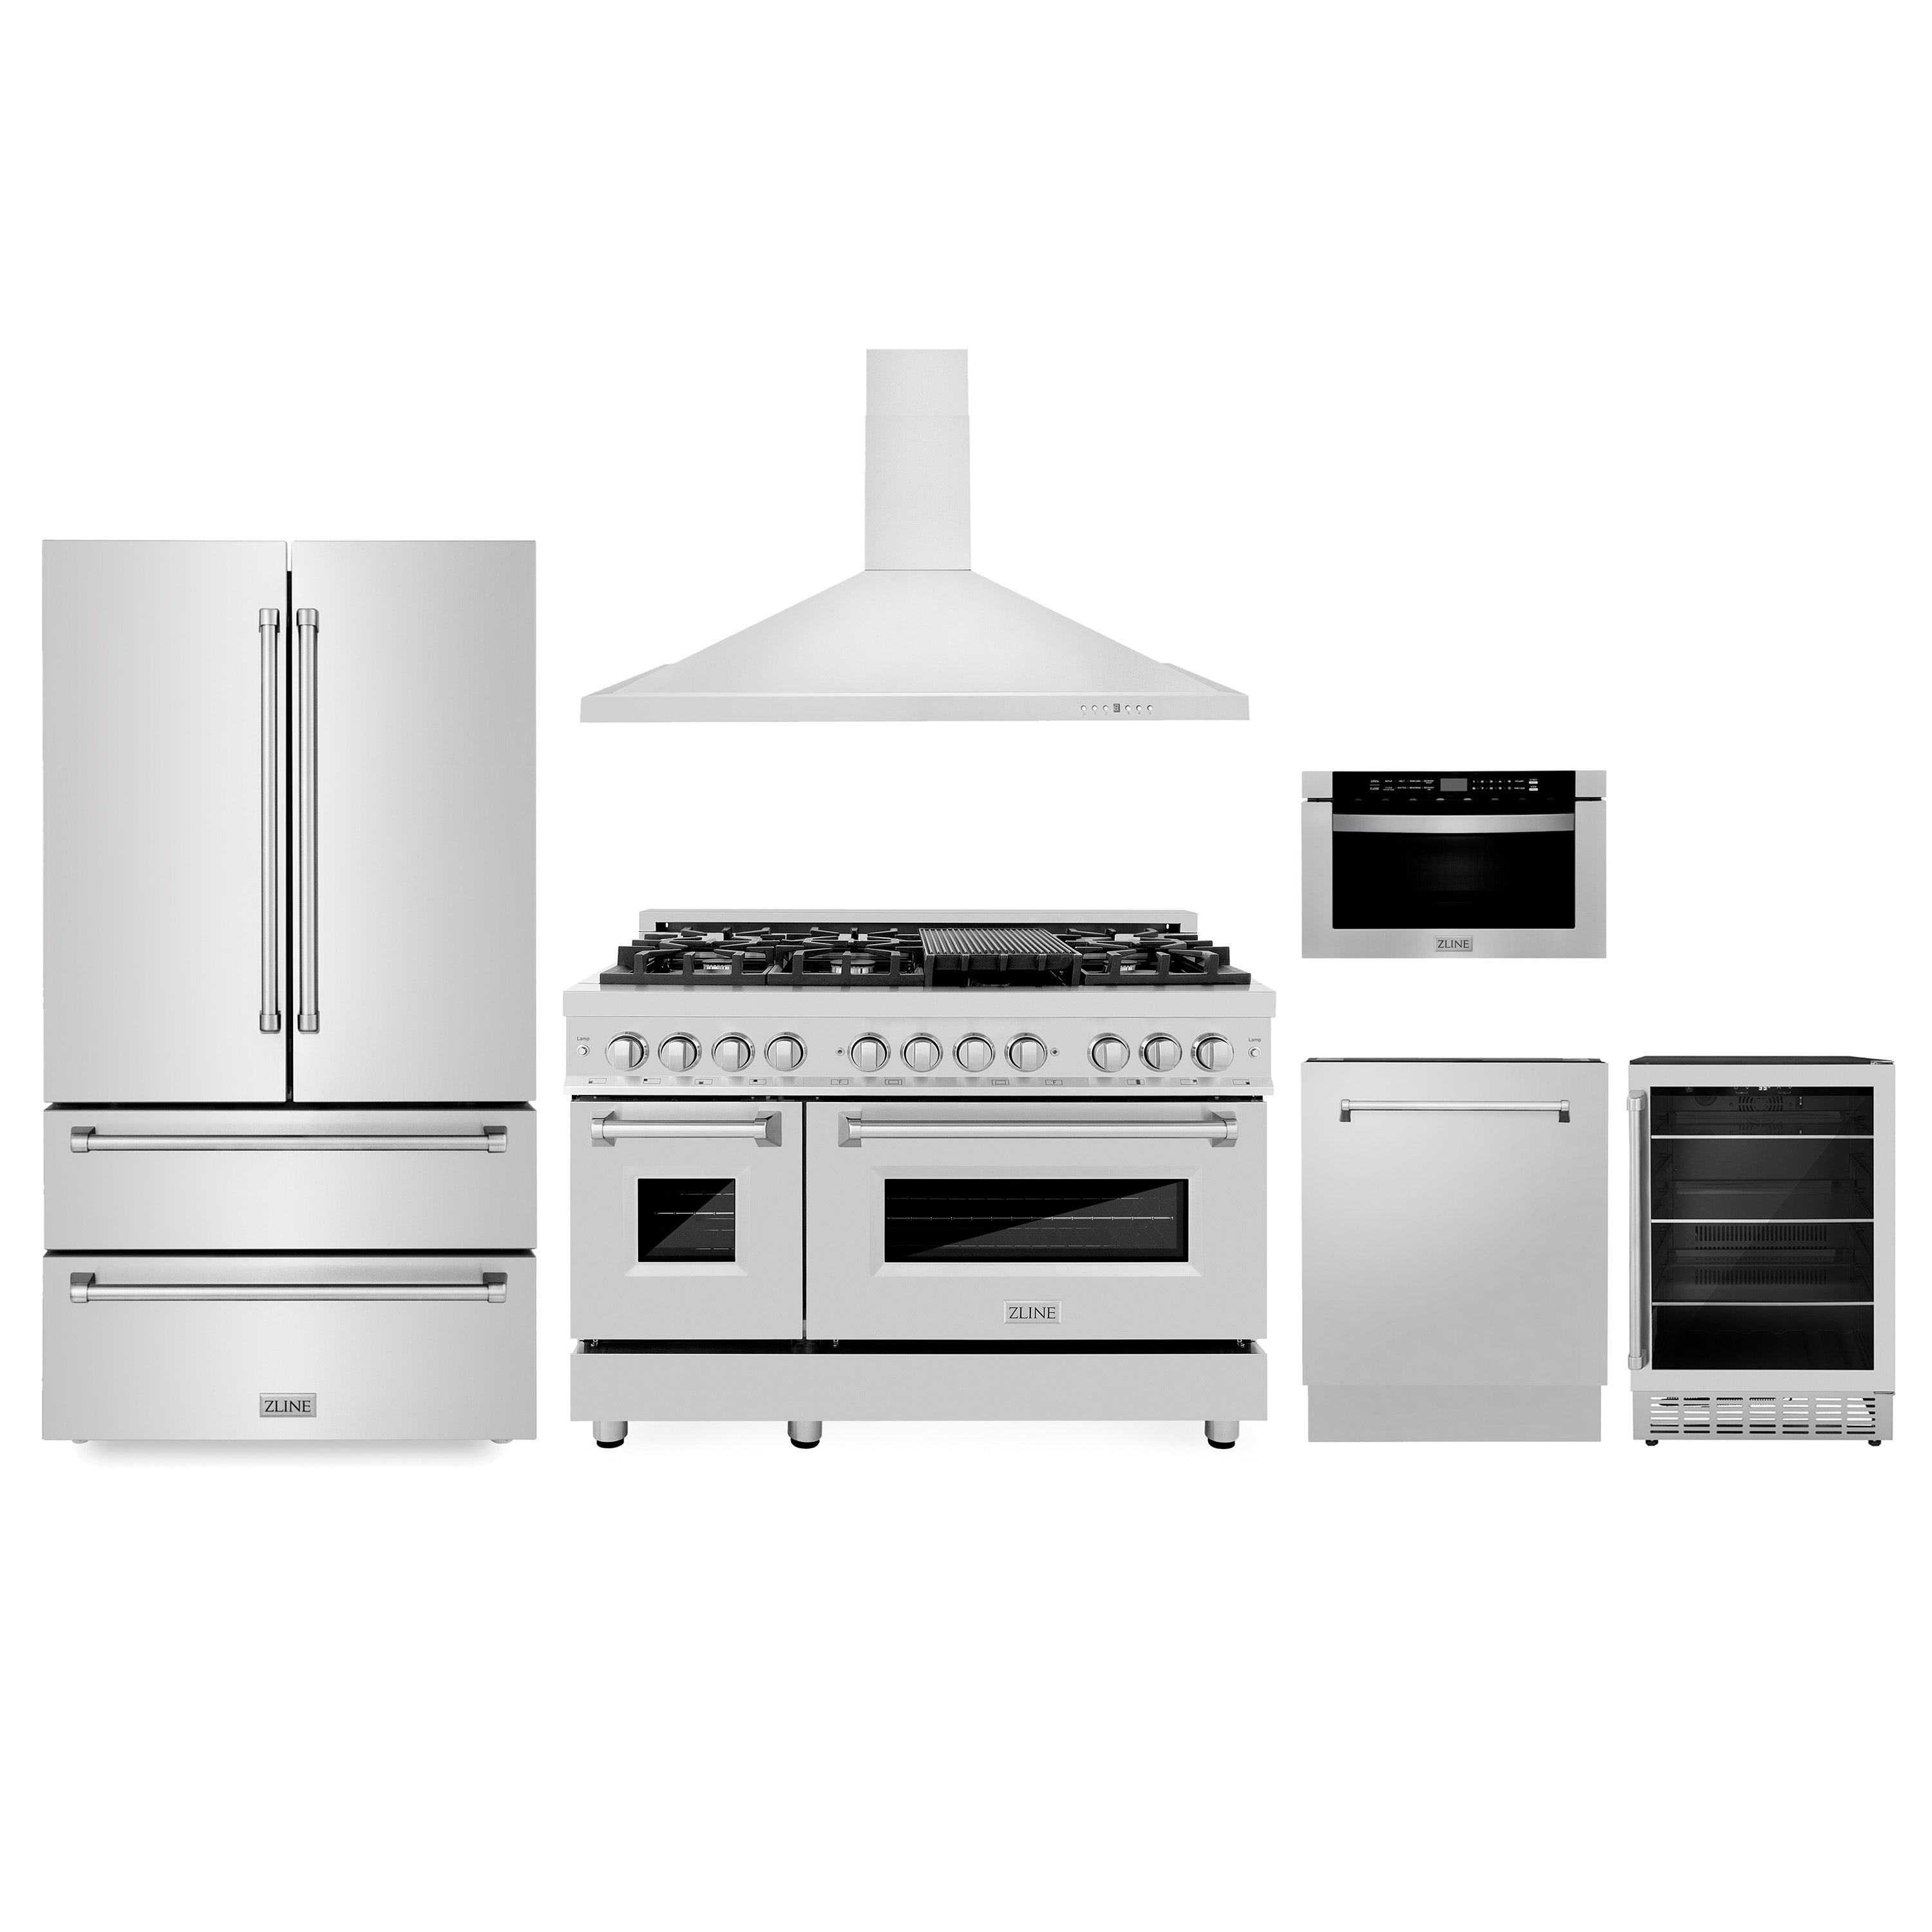 6-piece ZLINE Stainless Steel Appliance Package, featuring a 36 in. French Door Refrigerator, 48 in. Dual Fuel Range, 48 in. Range Hood, 24 in. Microwave Drawer, 24 in. Tall Tub Dishwasher, and a 24 in. Beverage Fridge.